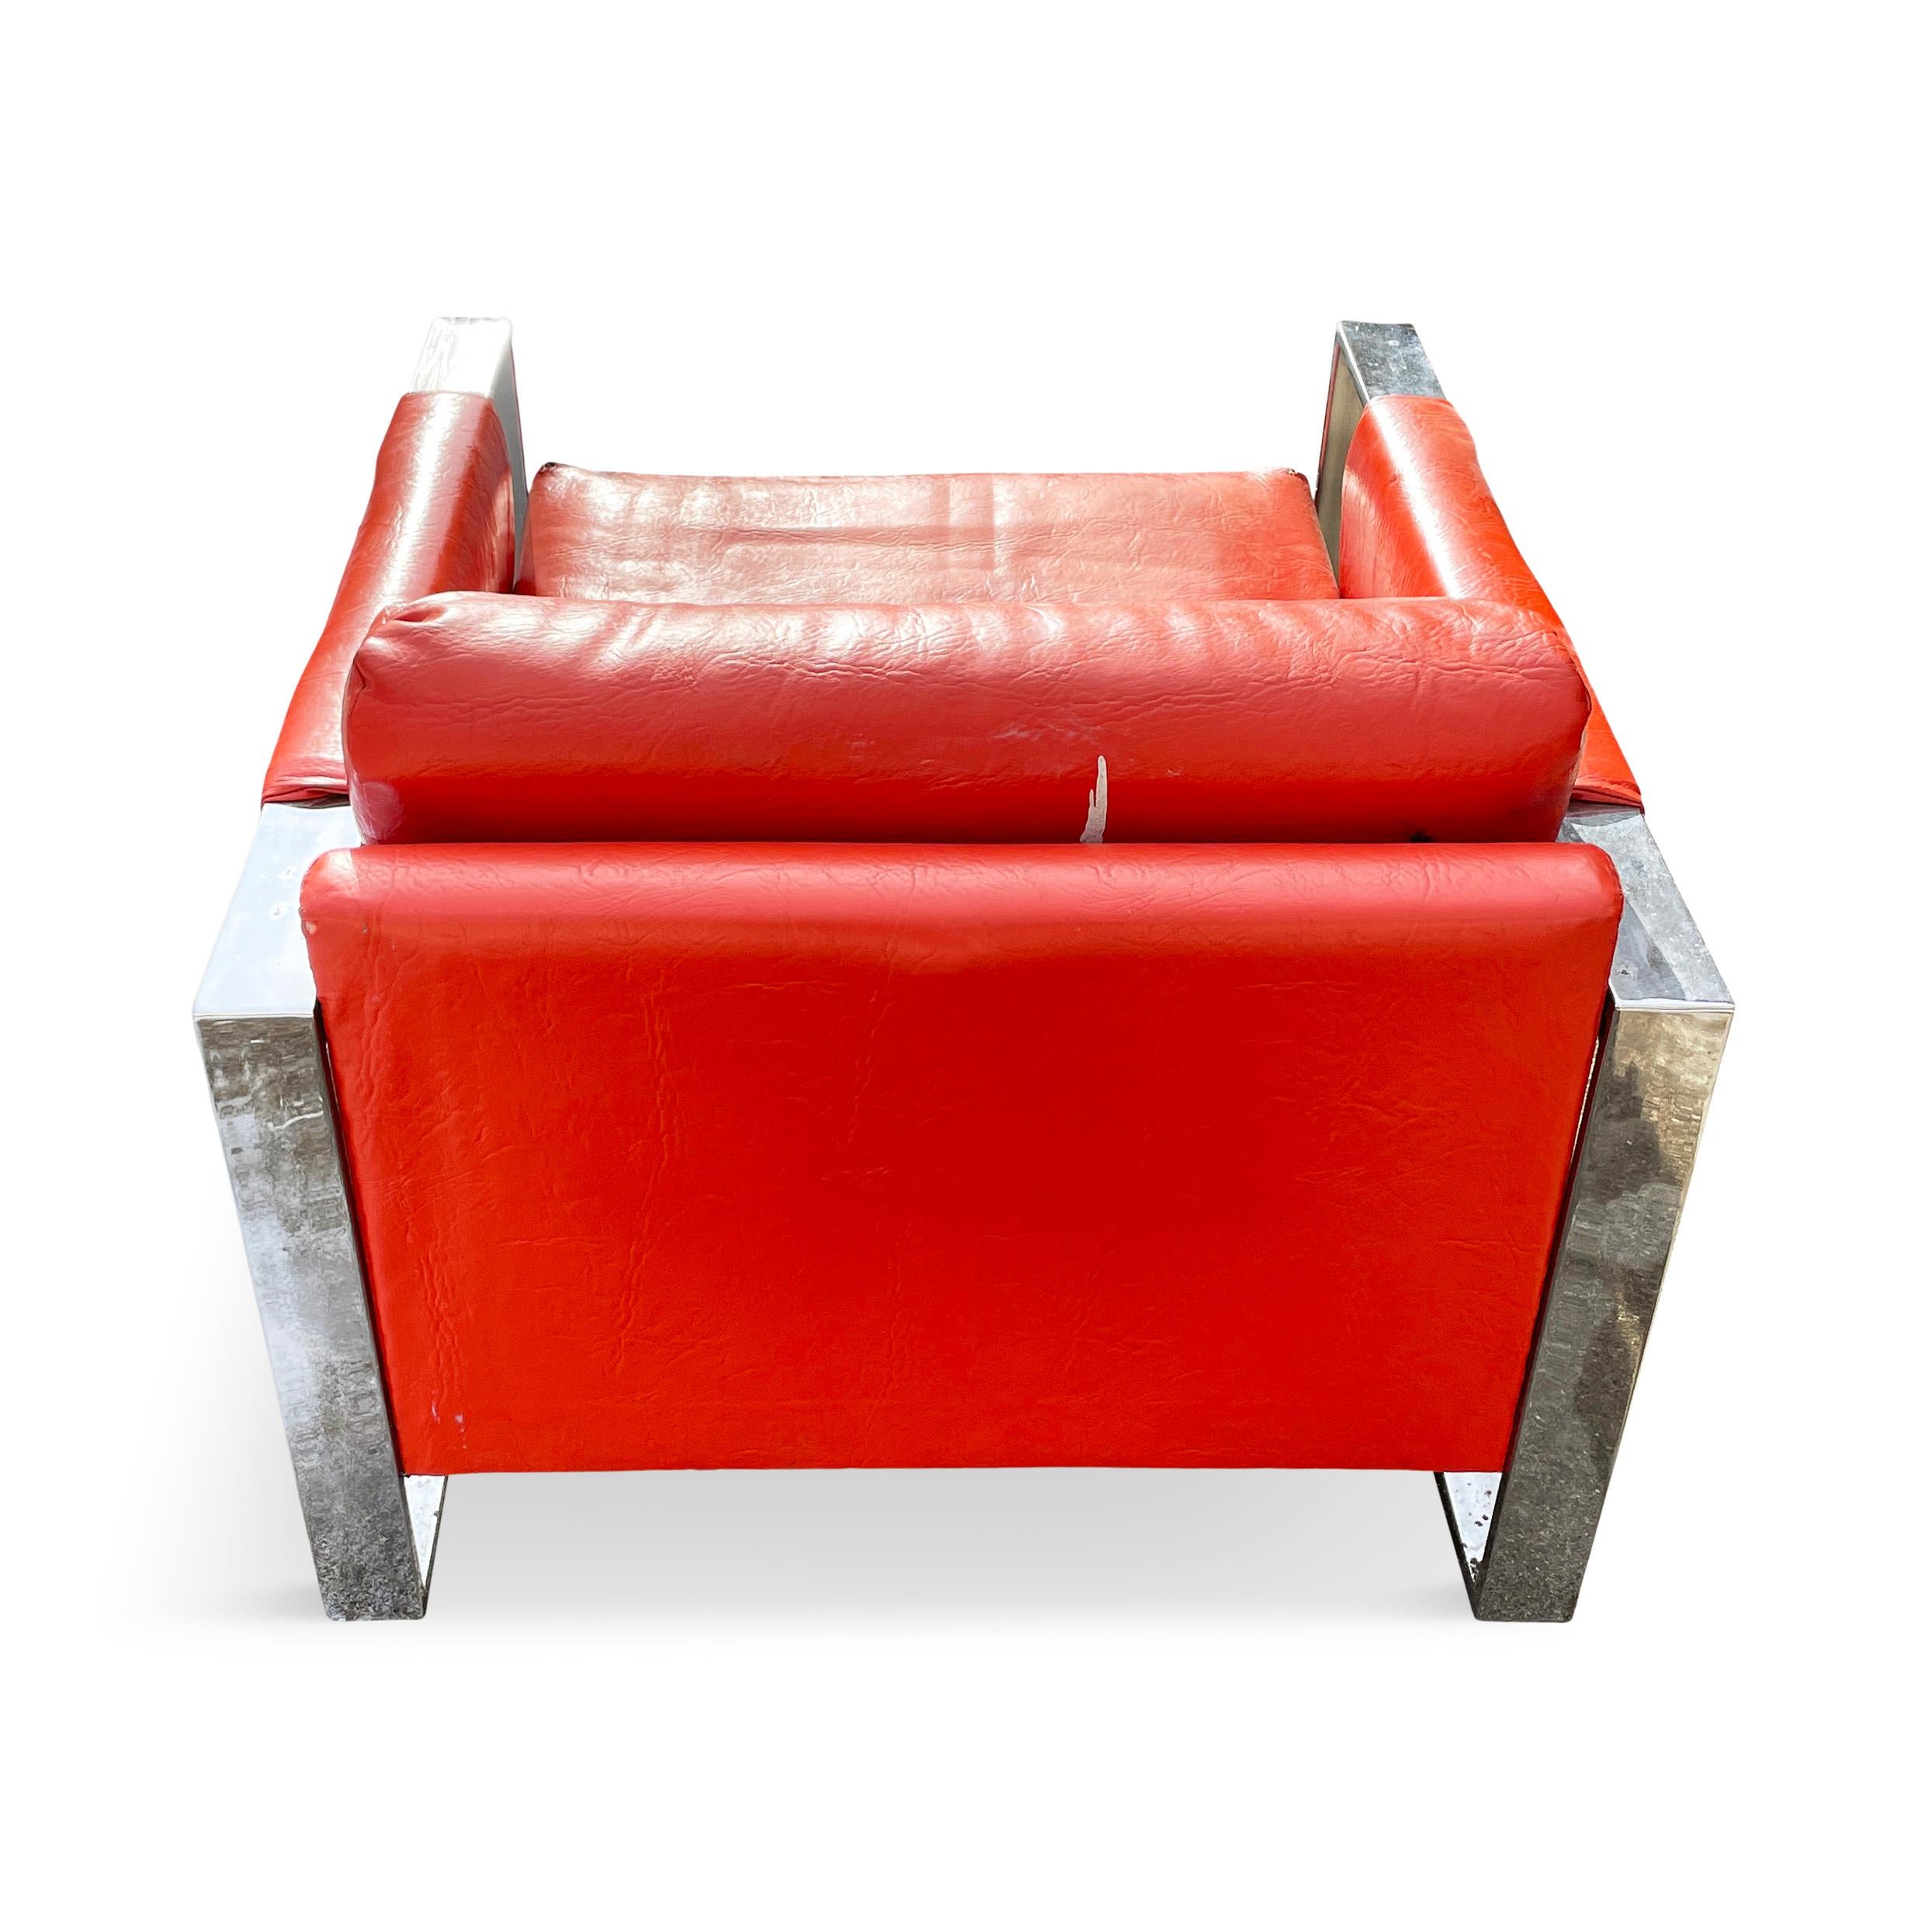 Naugahyde Pair of Chrome Lounge Chairs by Adrian Pearsall for Craft Associates